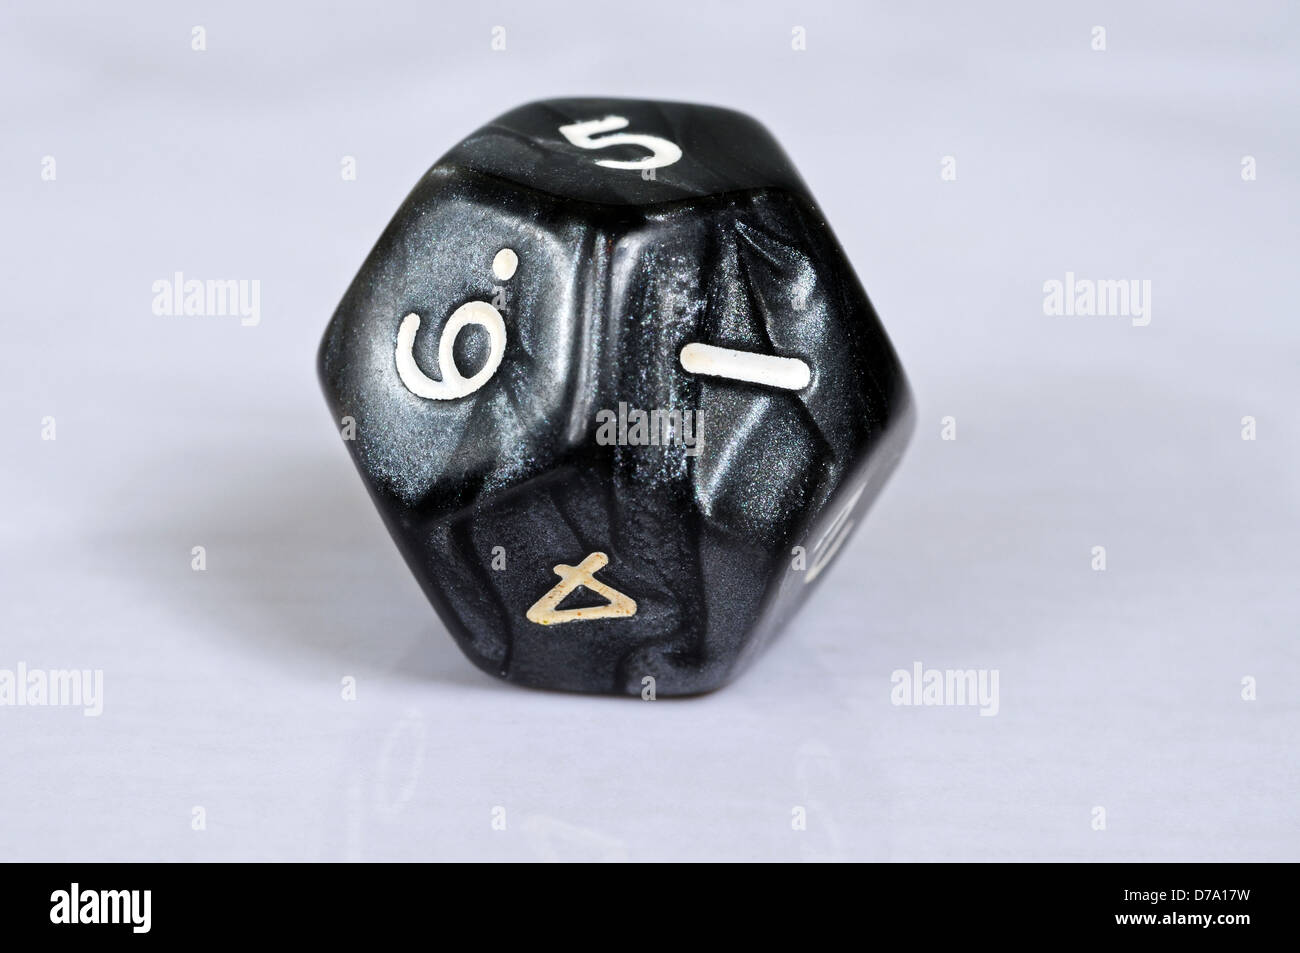 Platonic dodecahedron 12 sided die against a grey background. Stock Photo